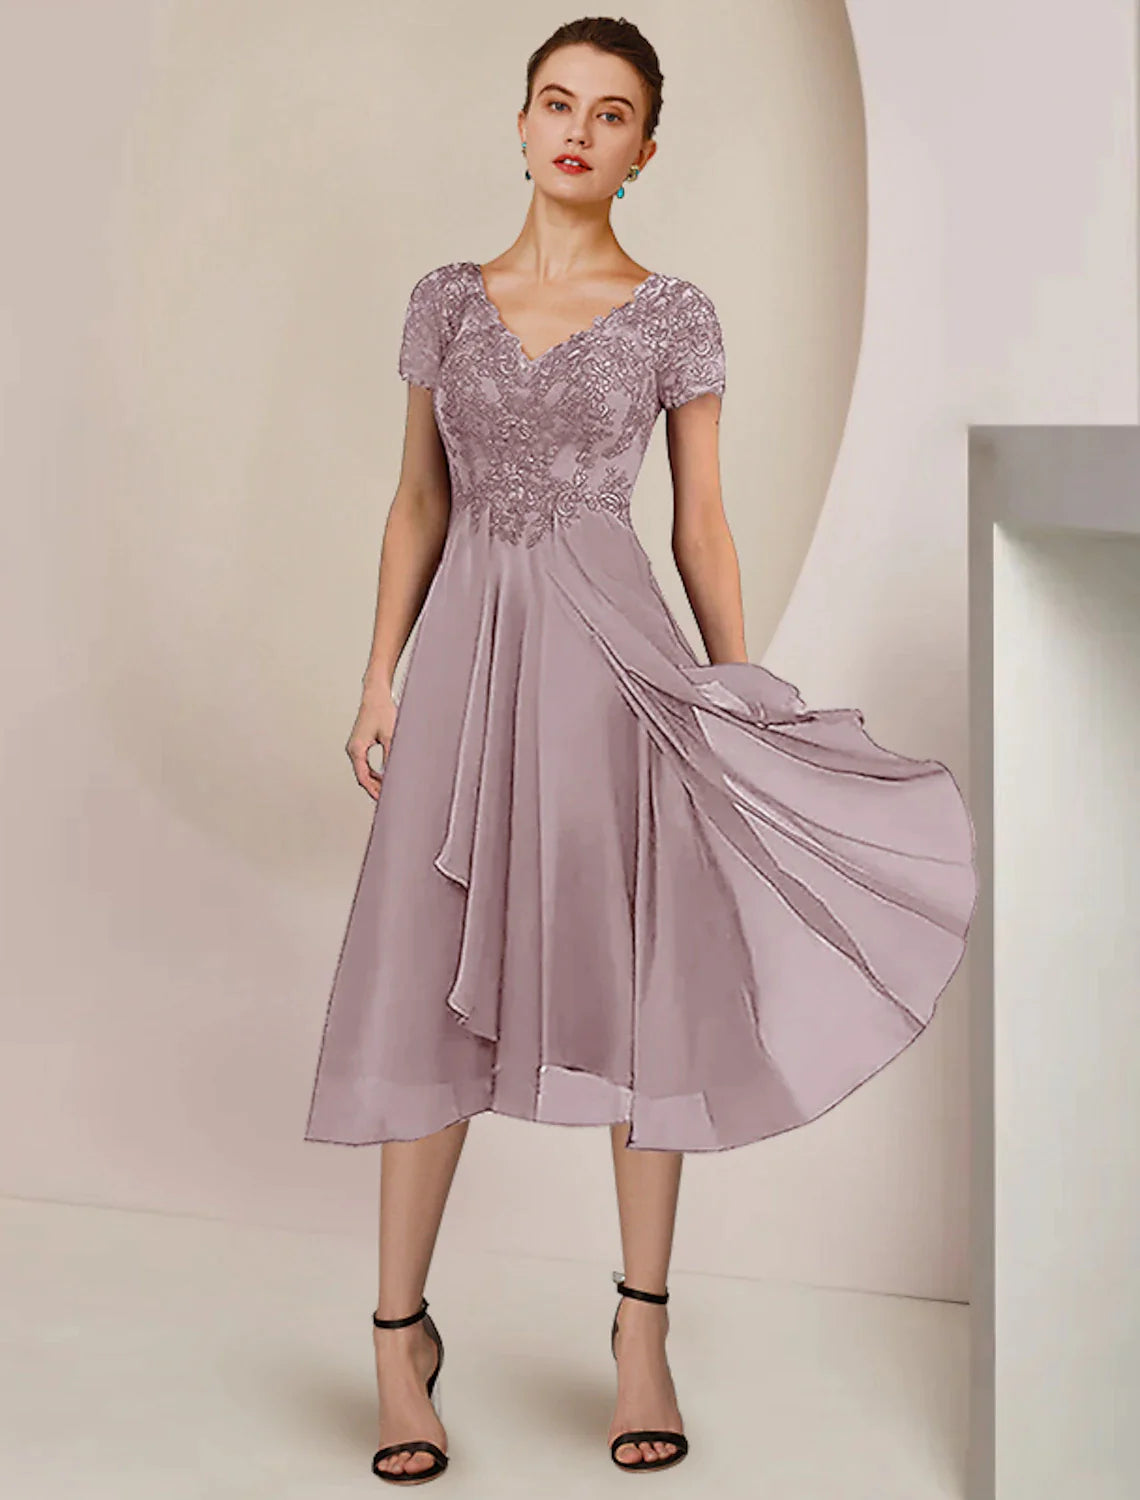 Two Piece A-Line Mother of the Bride Dress Formal Wedding Guest Elegant V Neck Asymmetrical Tea Length Chiffon Lace Short Sleeve Wrap Included with Pleats Appliques